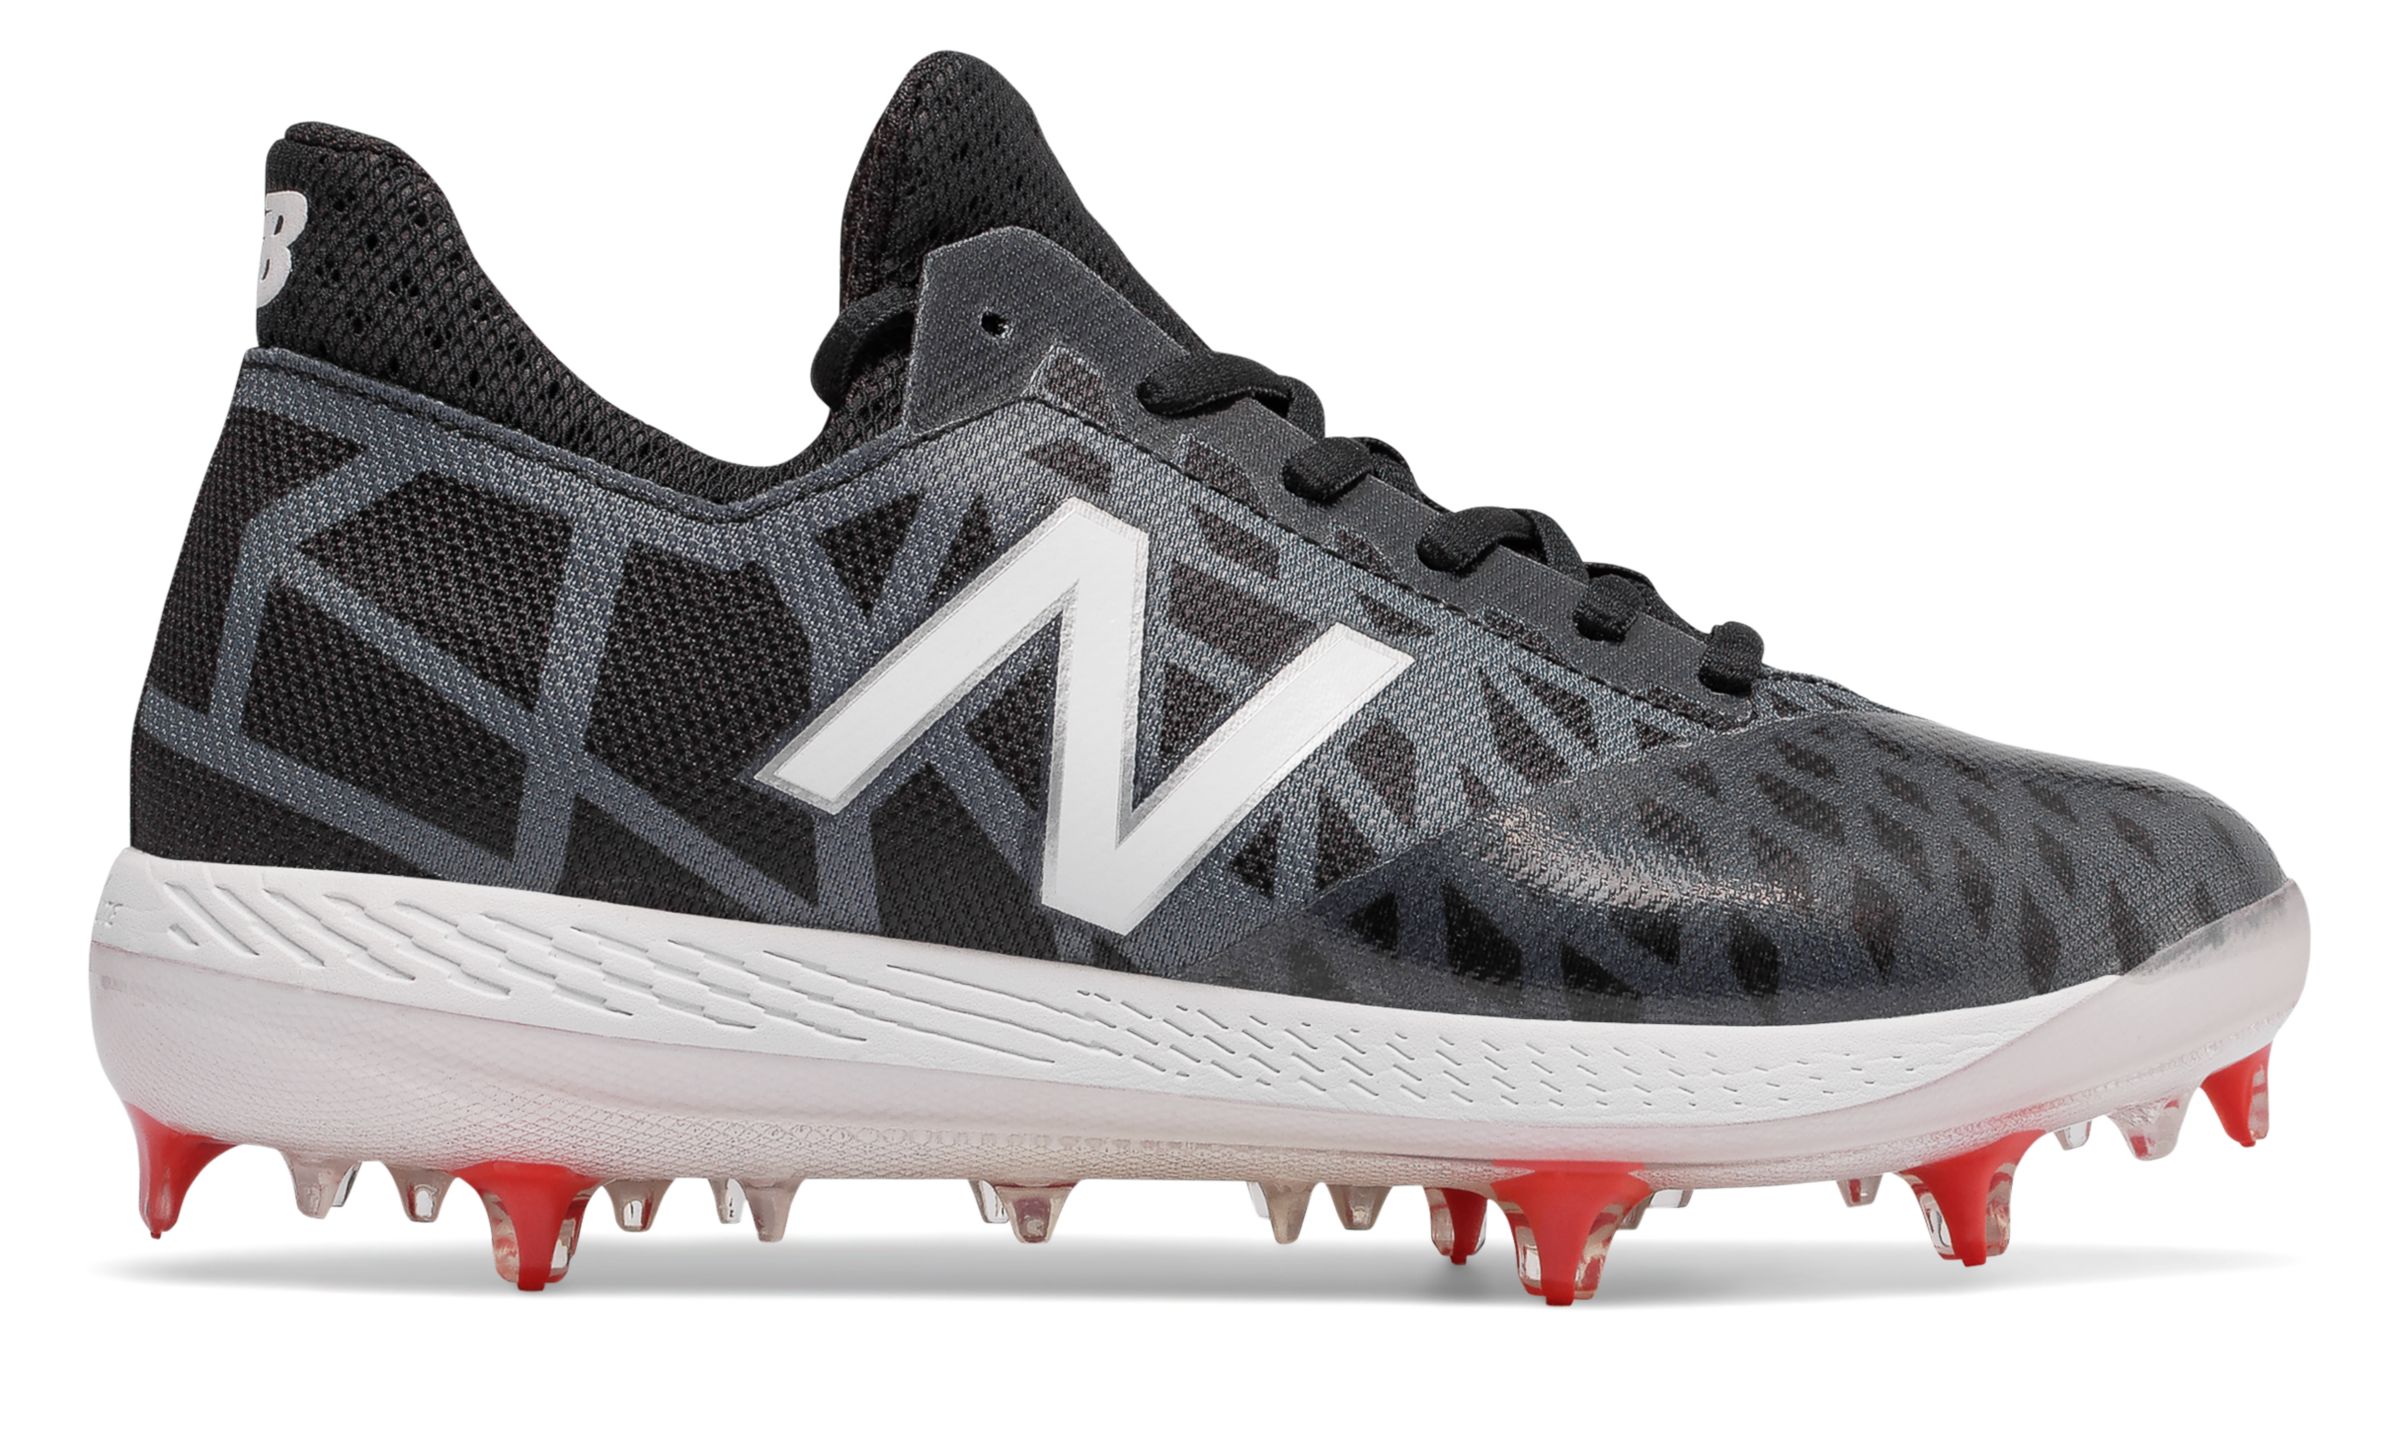 new balance youth cleats